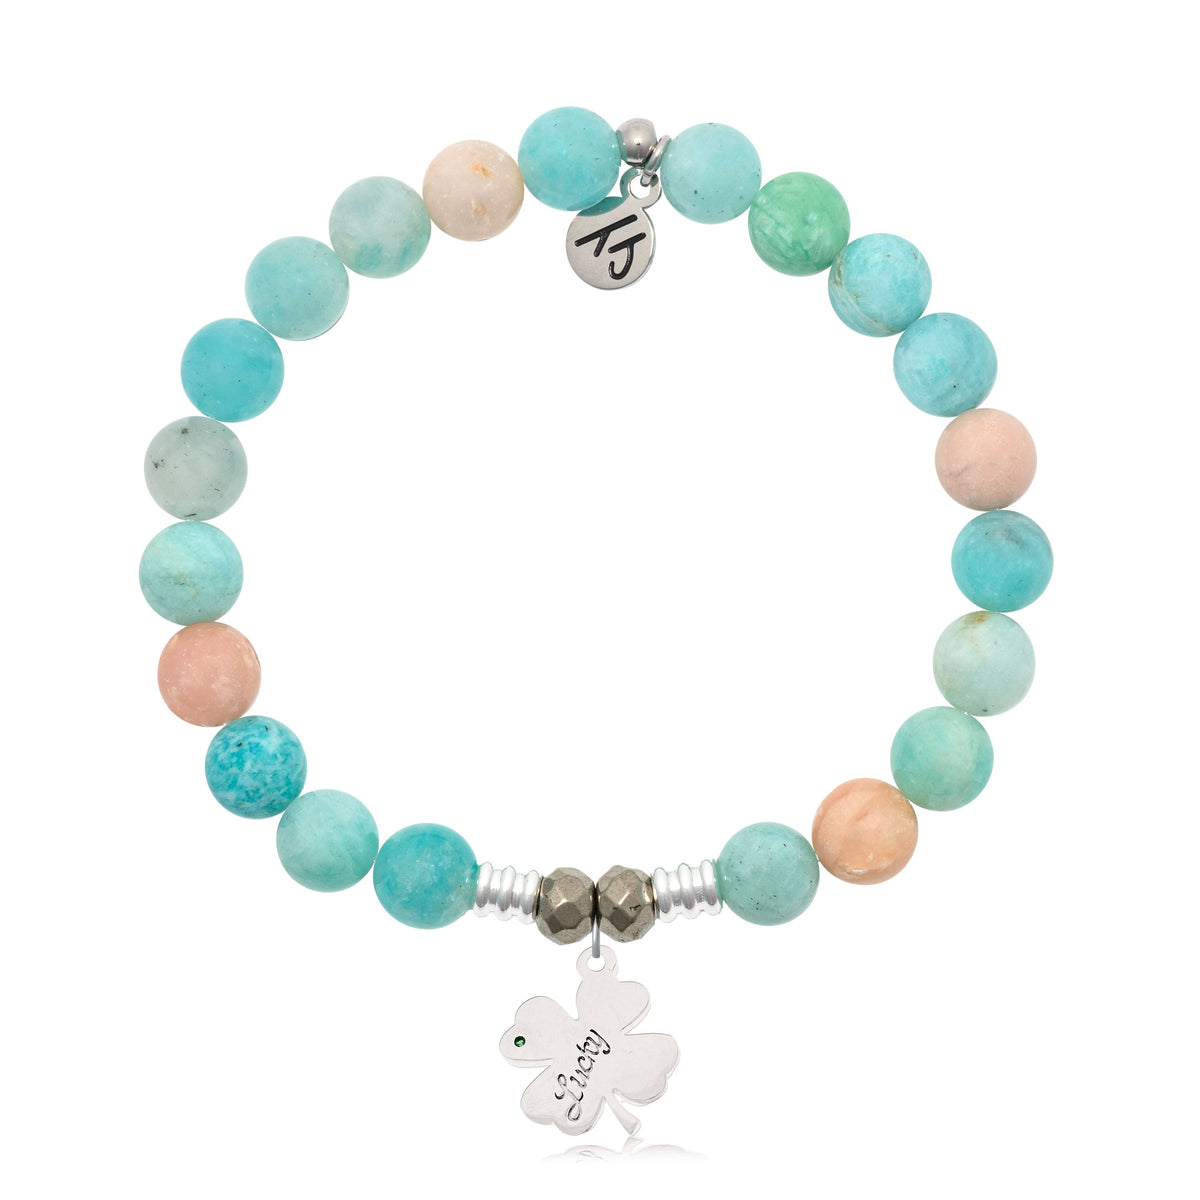 Multi Amazonite Gemstone Bracelet with Lucky Clover Sterling Silver Charm |  T. Jazelle